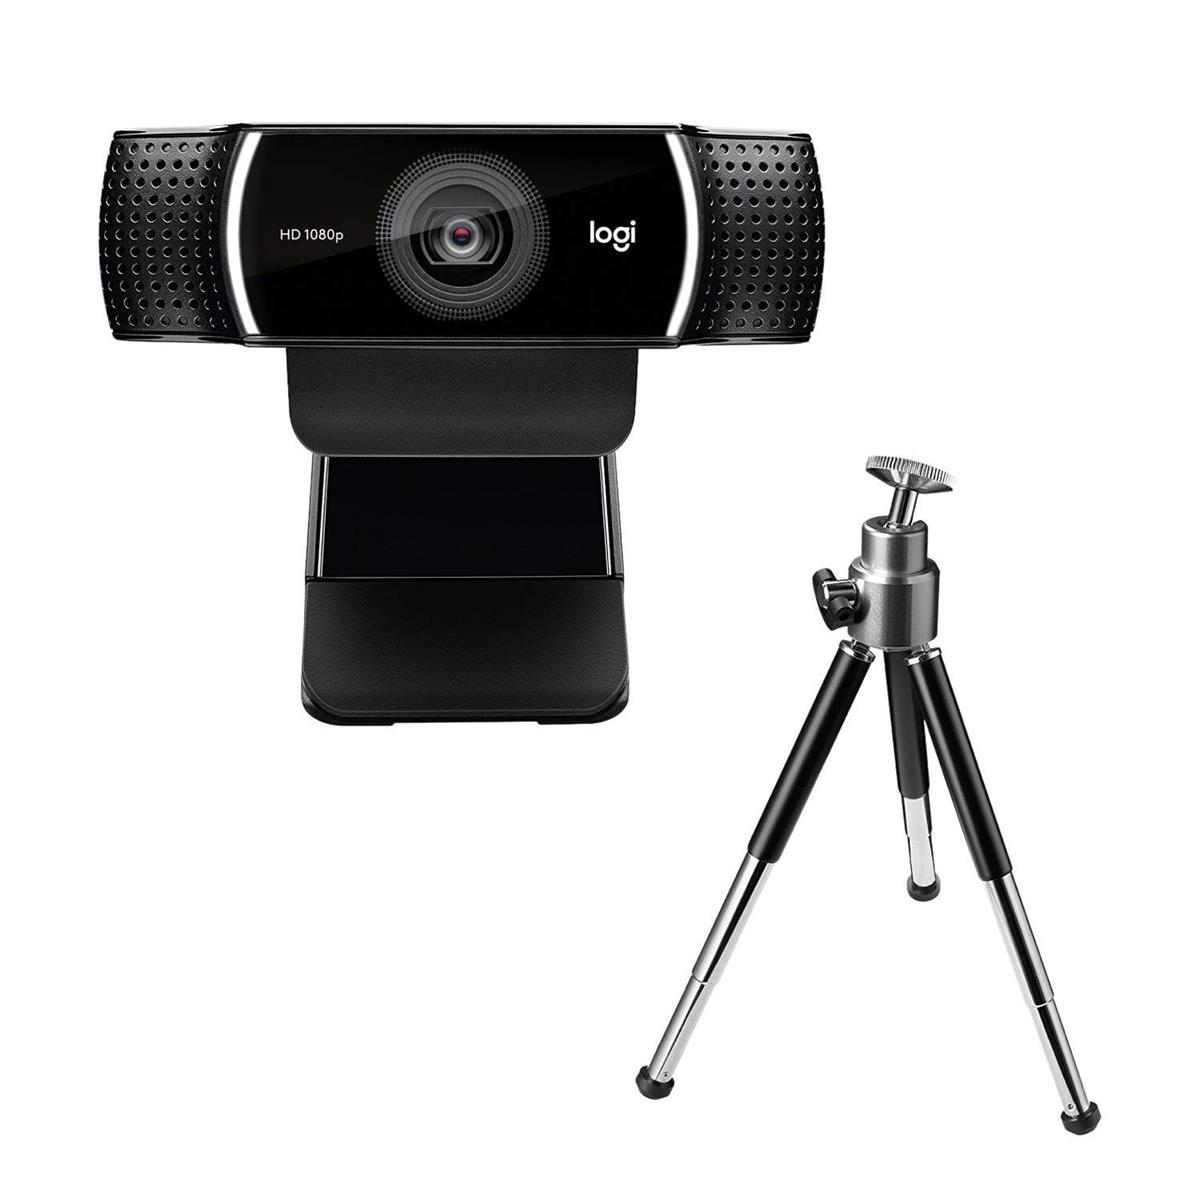 Logitech C922 Pro Full HD 1080p Stream Webcam with Stand for $49.99 Shipped